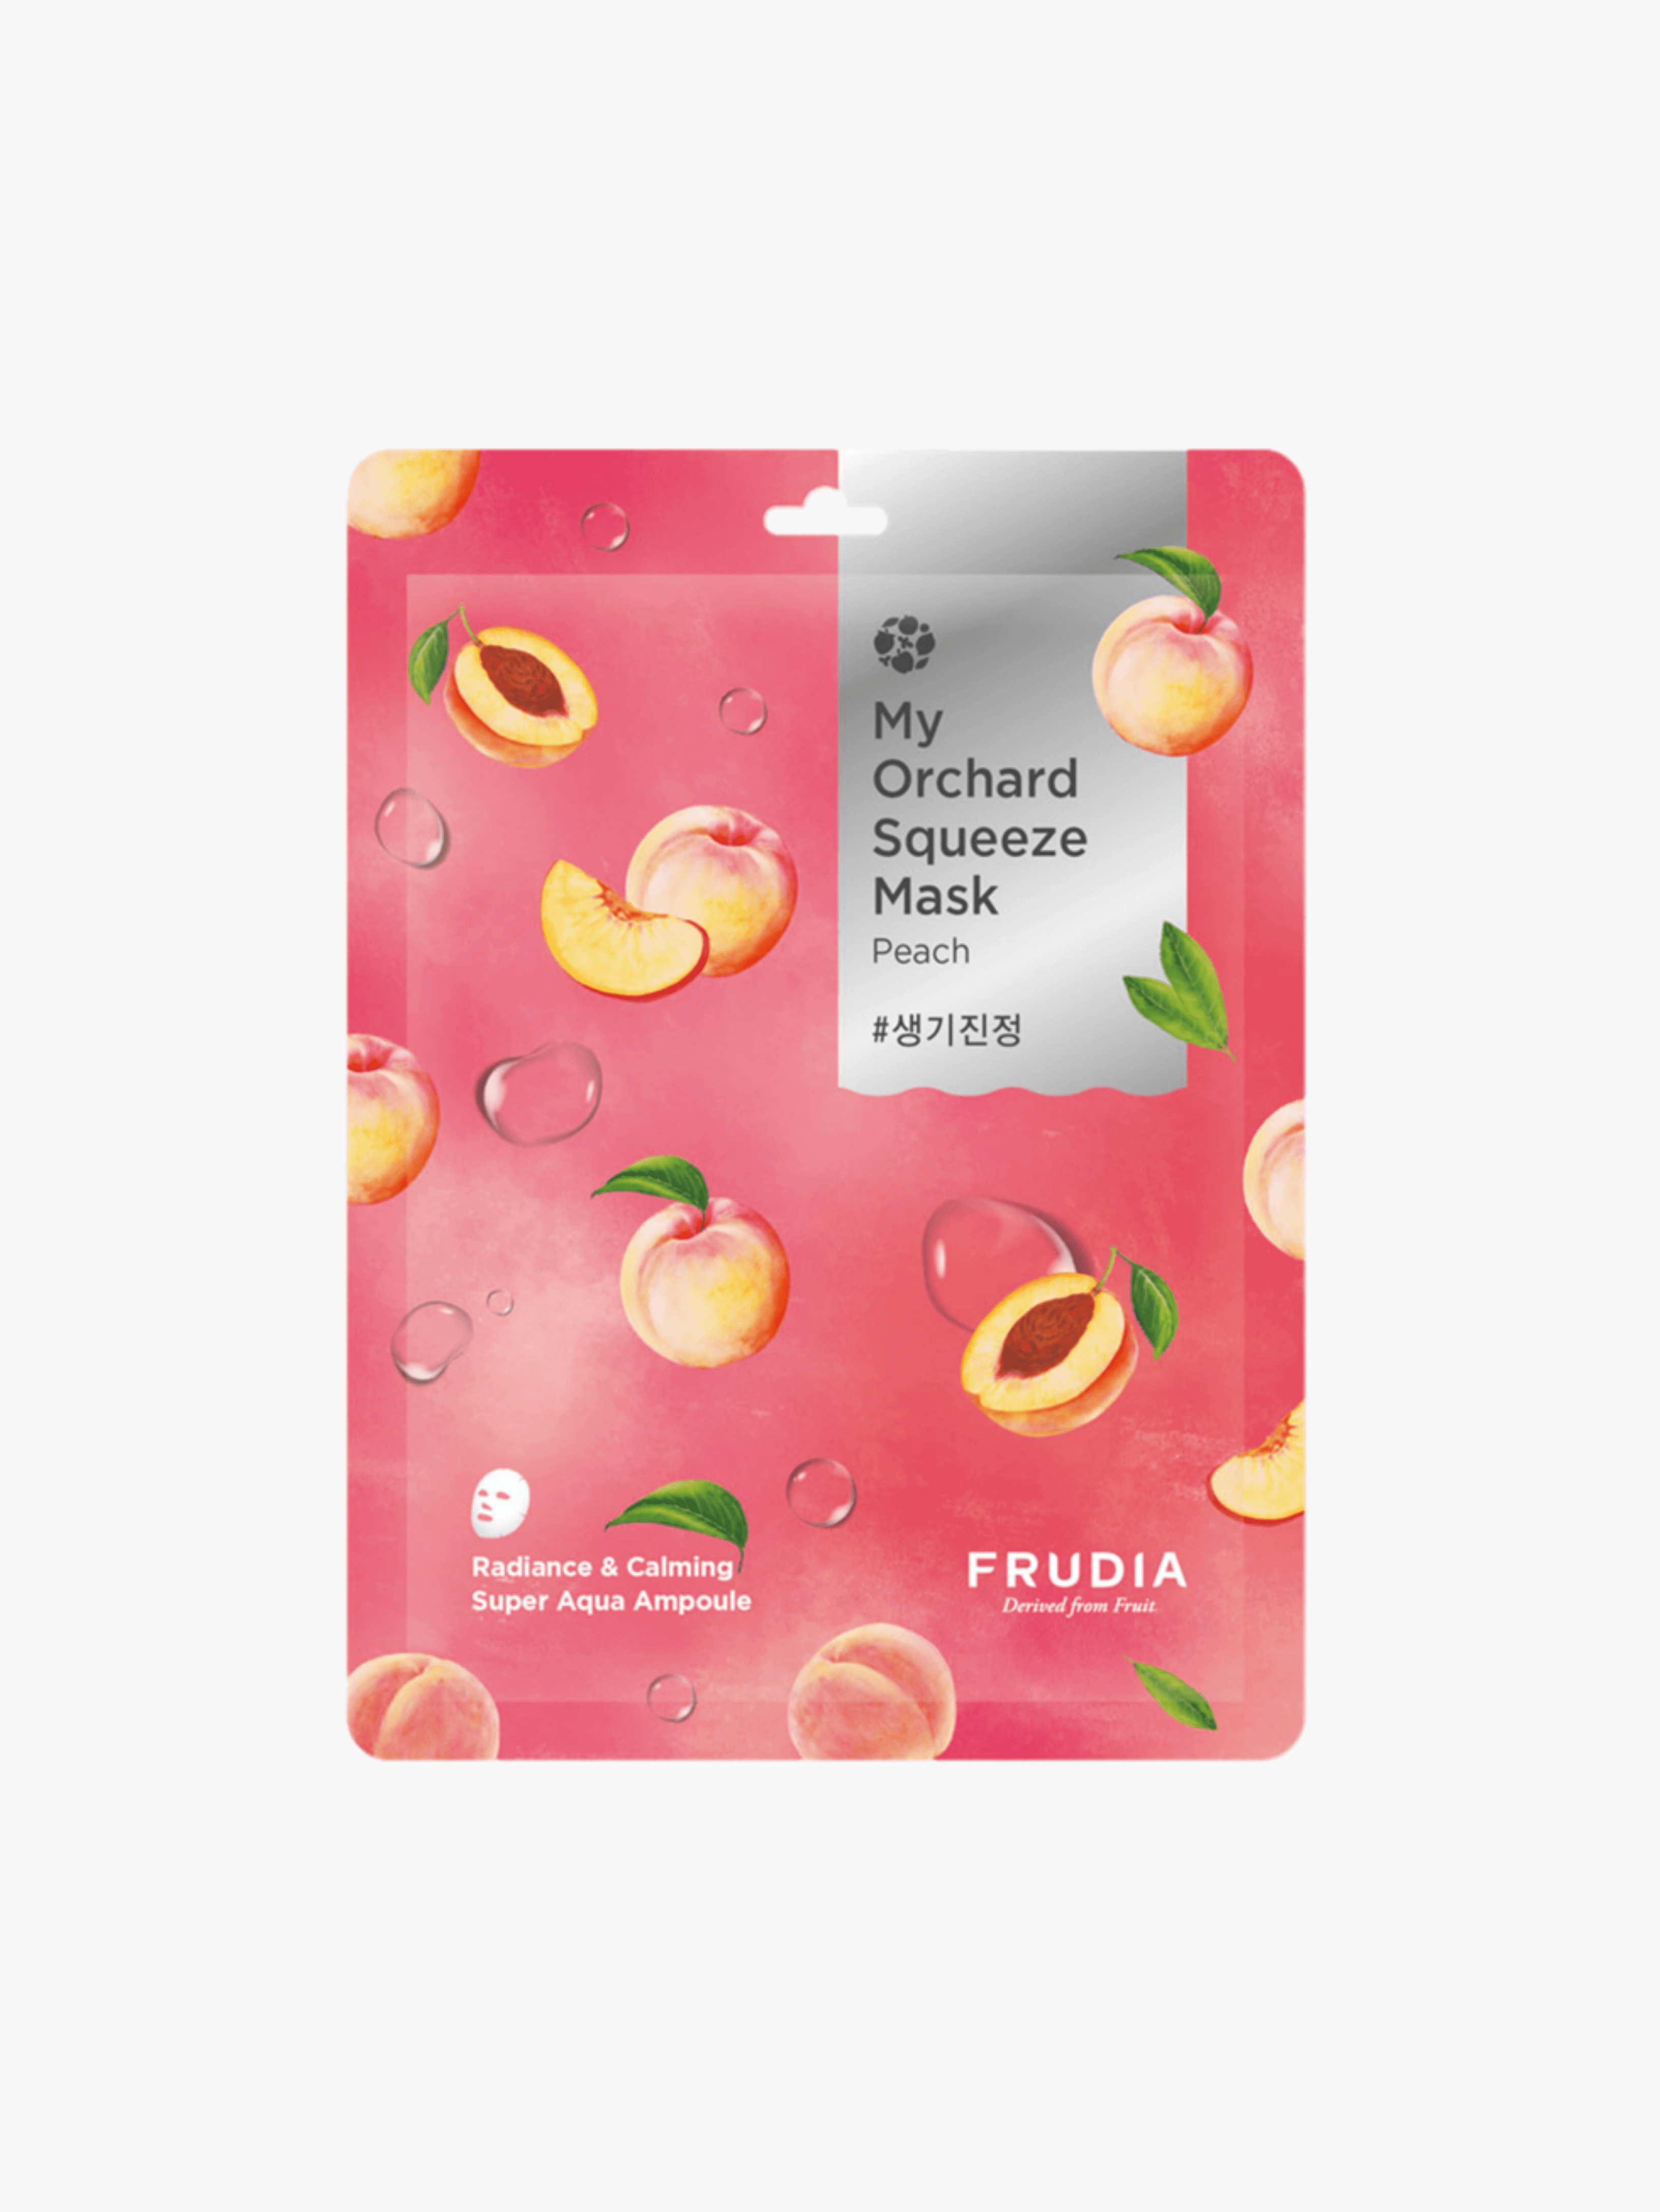 FRUDIA - Masque - My Orchard Squeeze Mask Peach